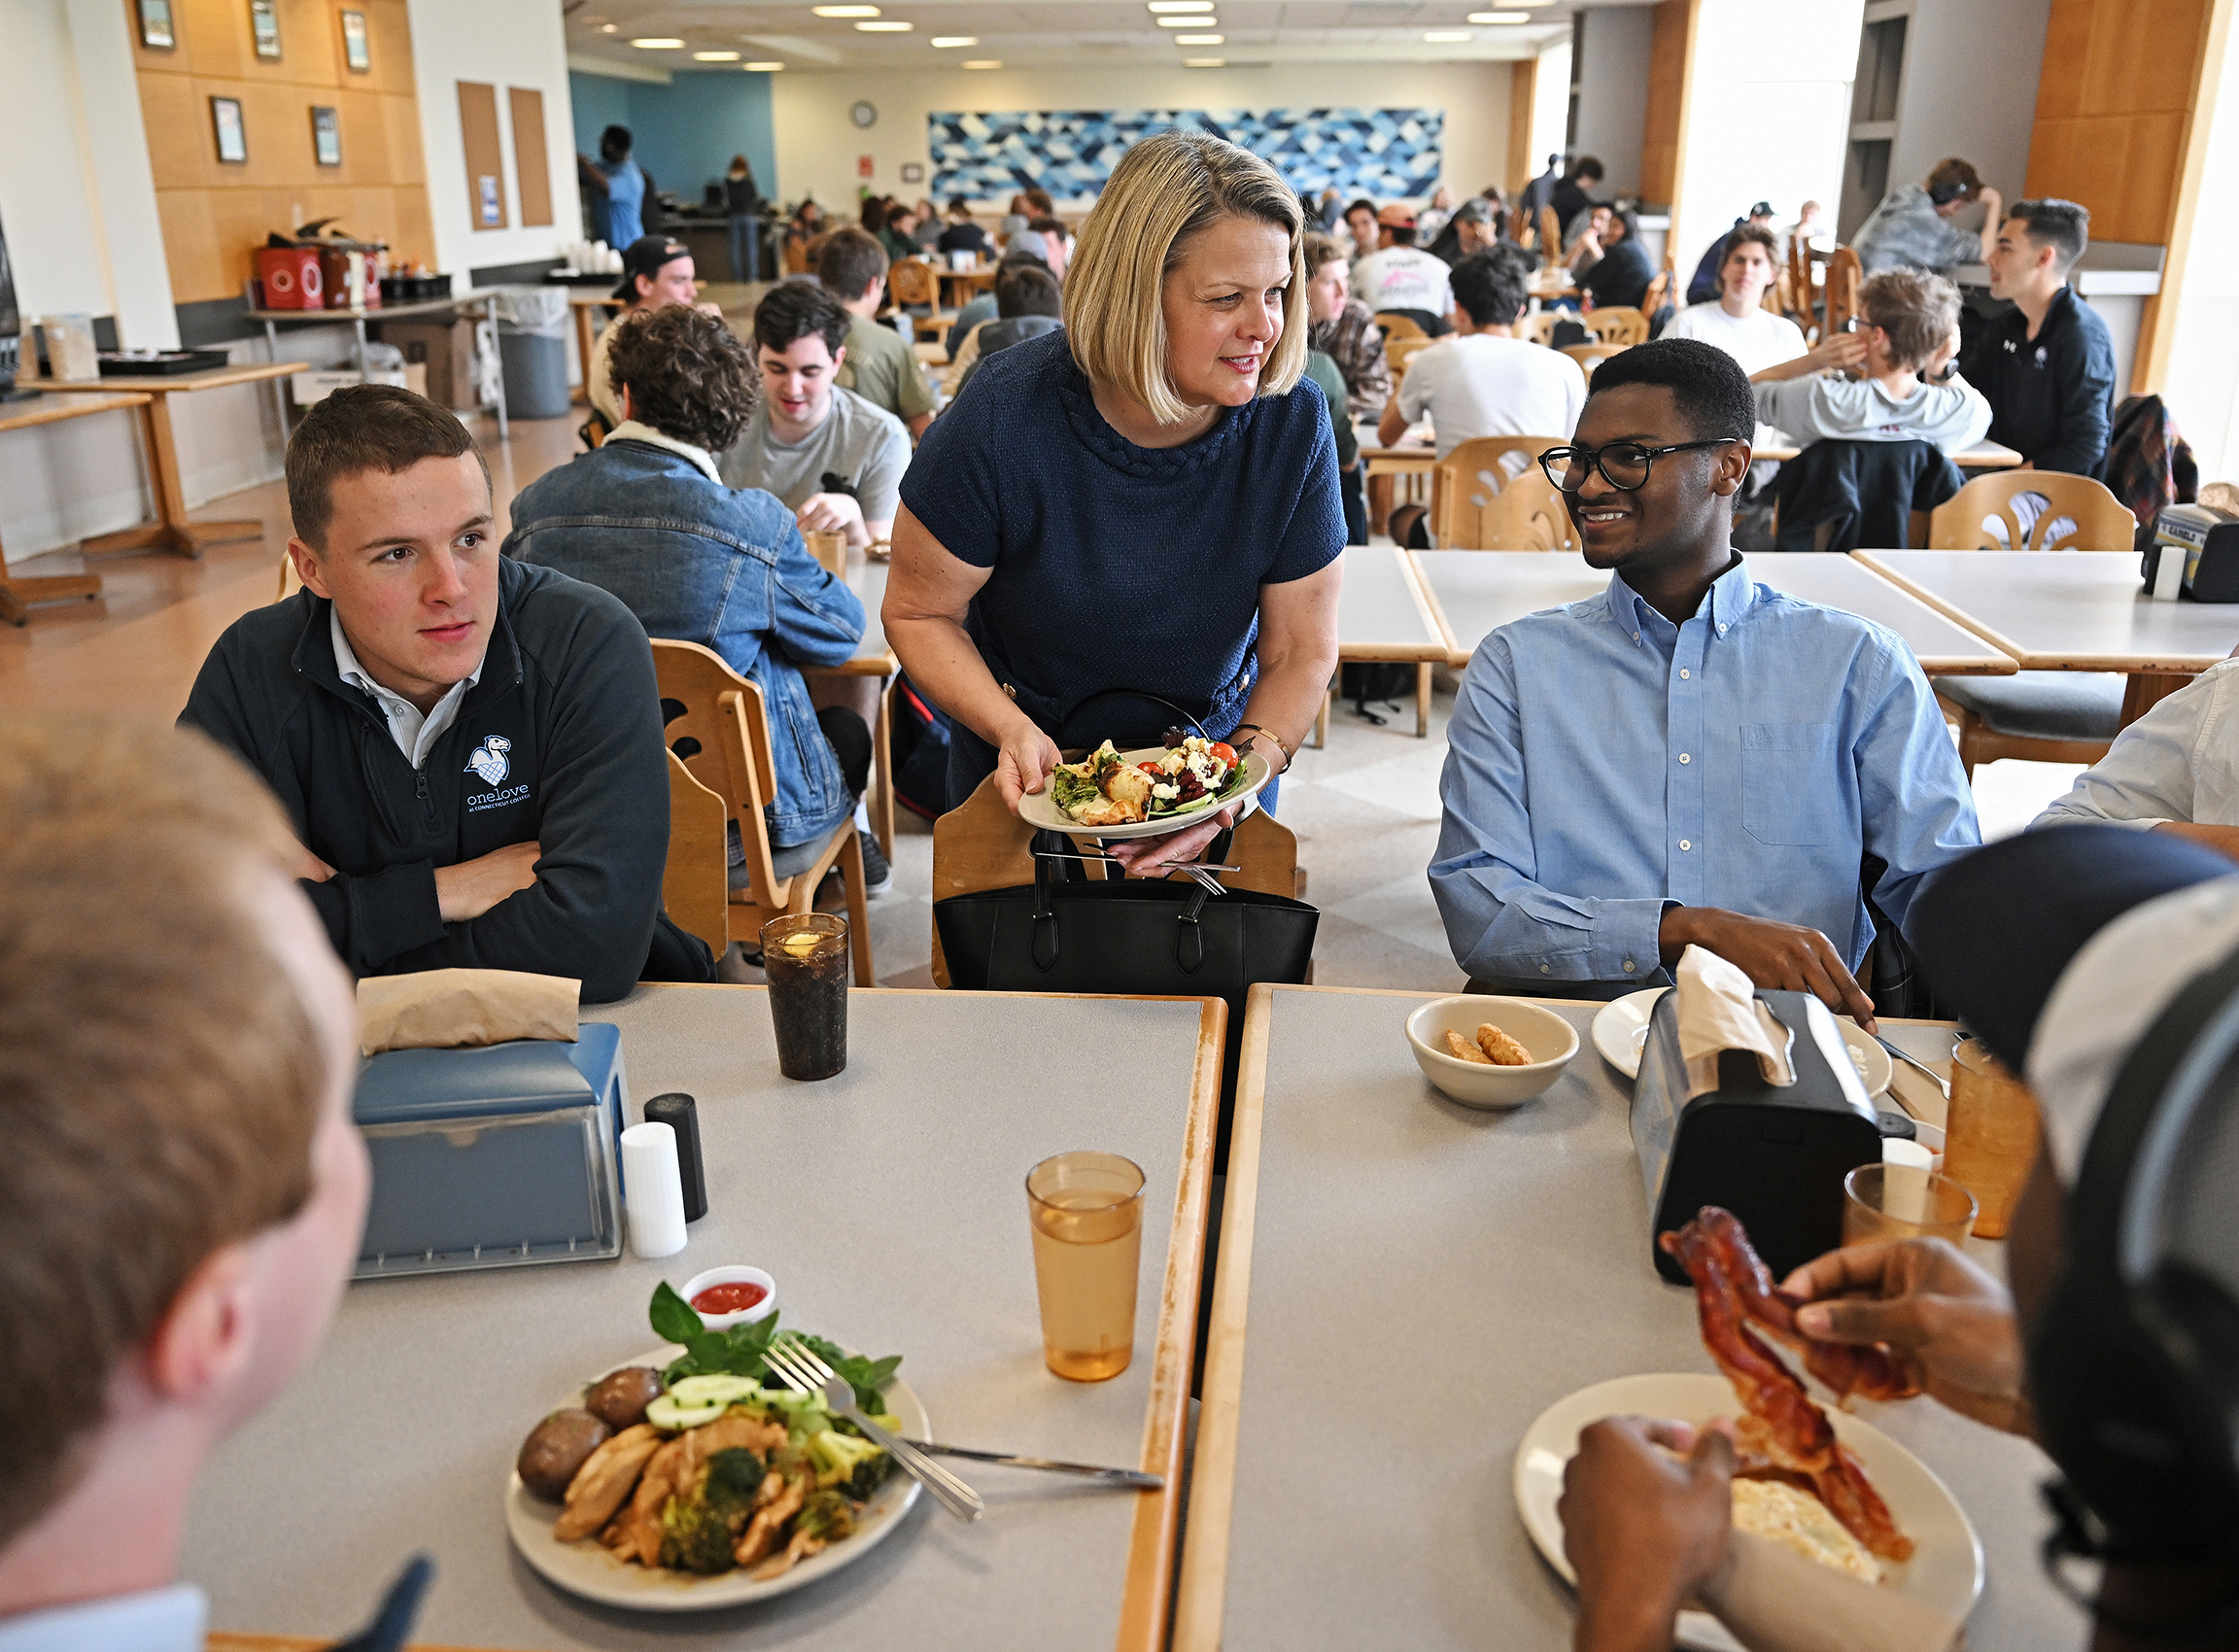 A woman in a blue dress joins a group of students at a dining hall table